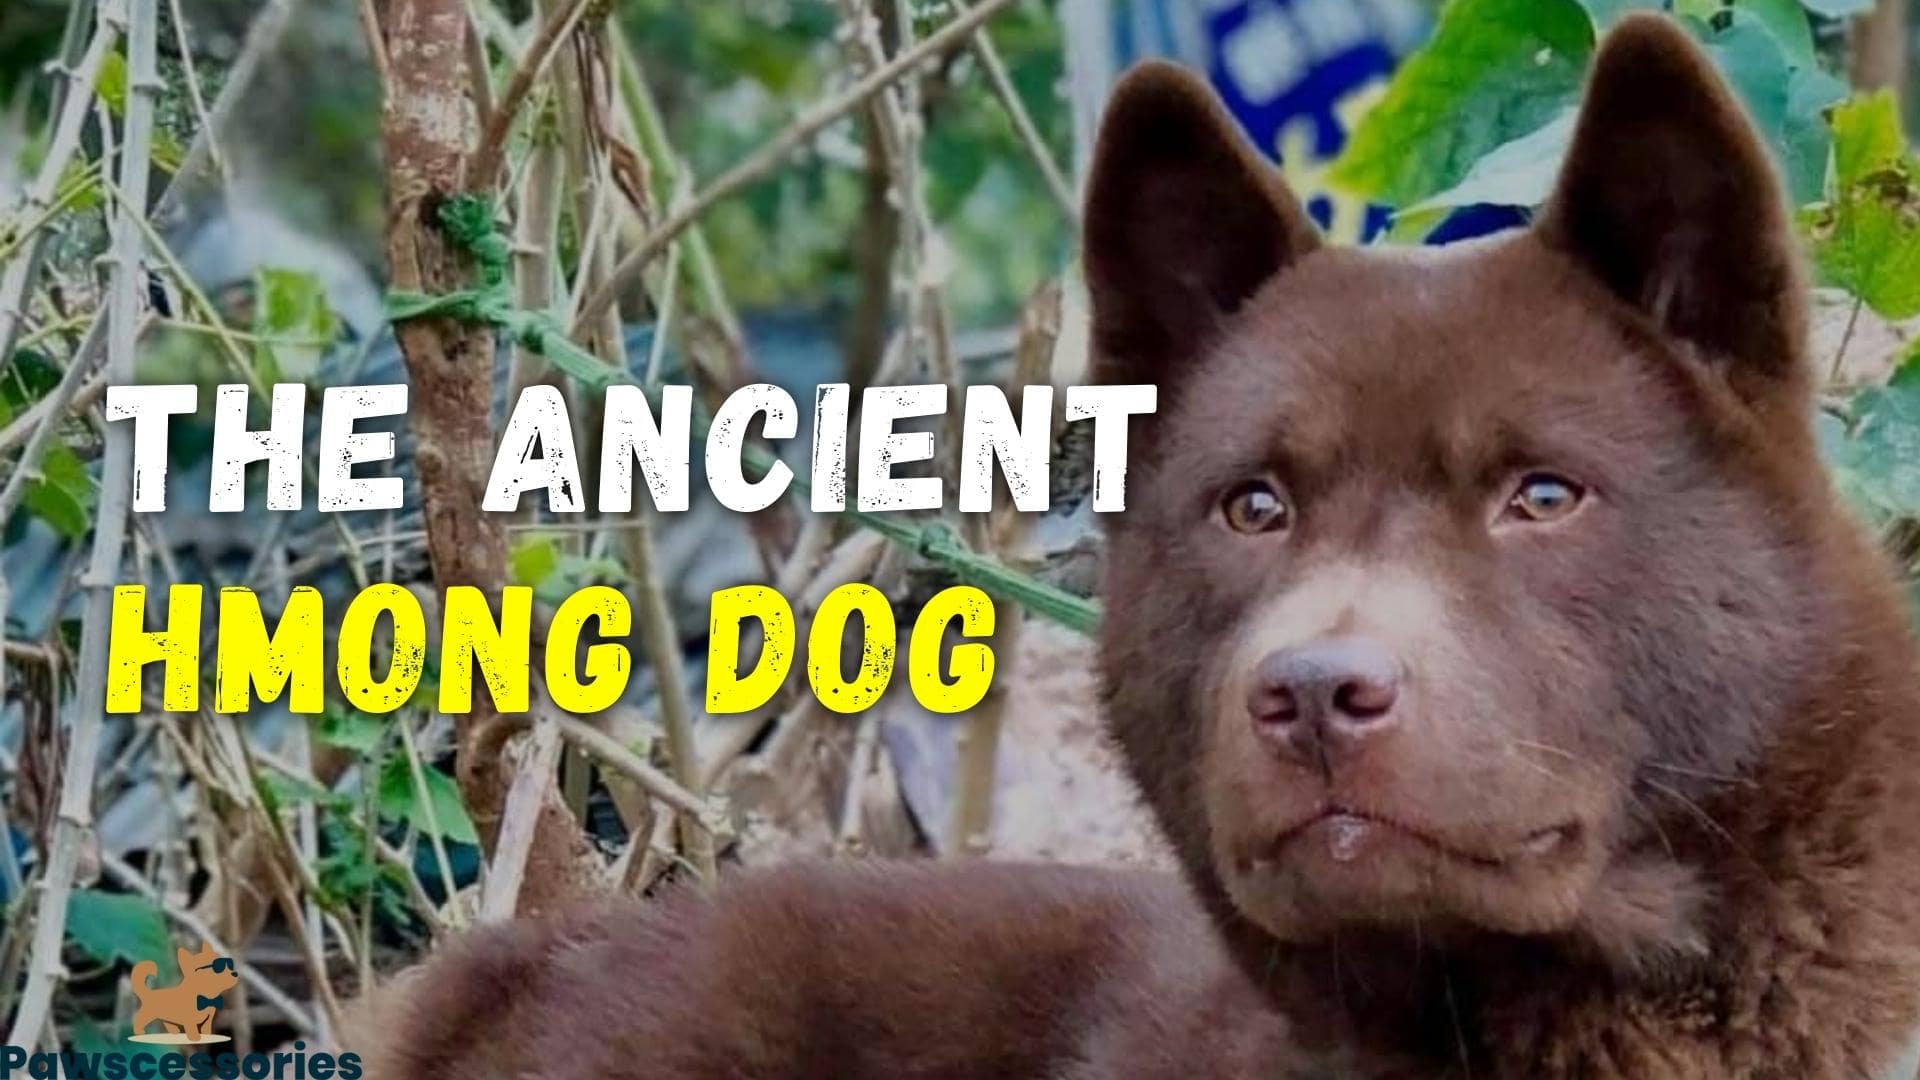 Hmong Dog (The Cat-Dog Hybrid) – All You Need To Know